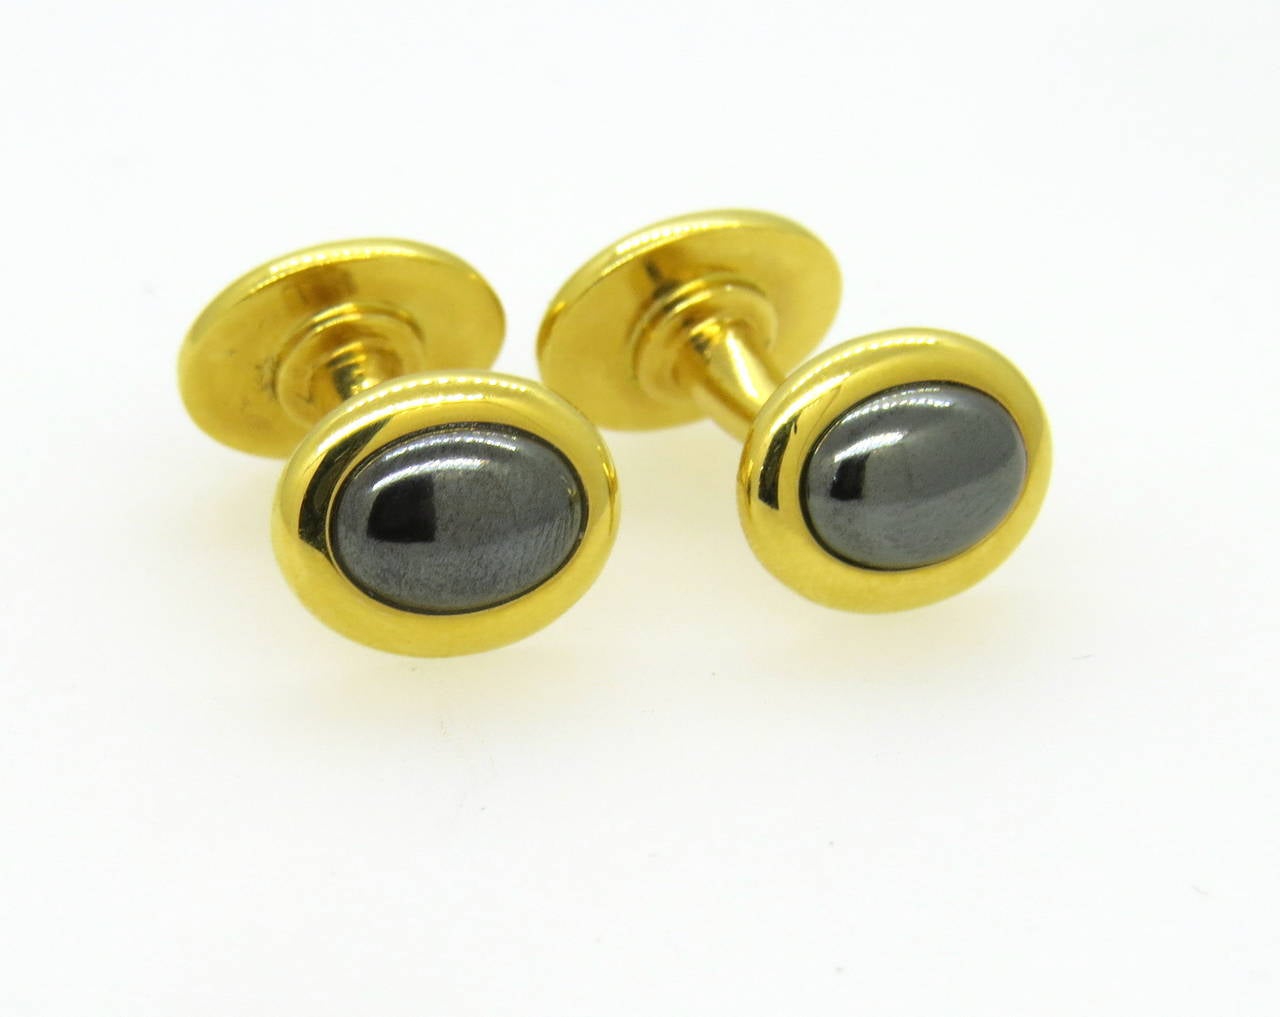 18k gold cufflinks by Trianon with hematite stones. Top measures 13mm x 10m. weight - 11.9 gr